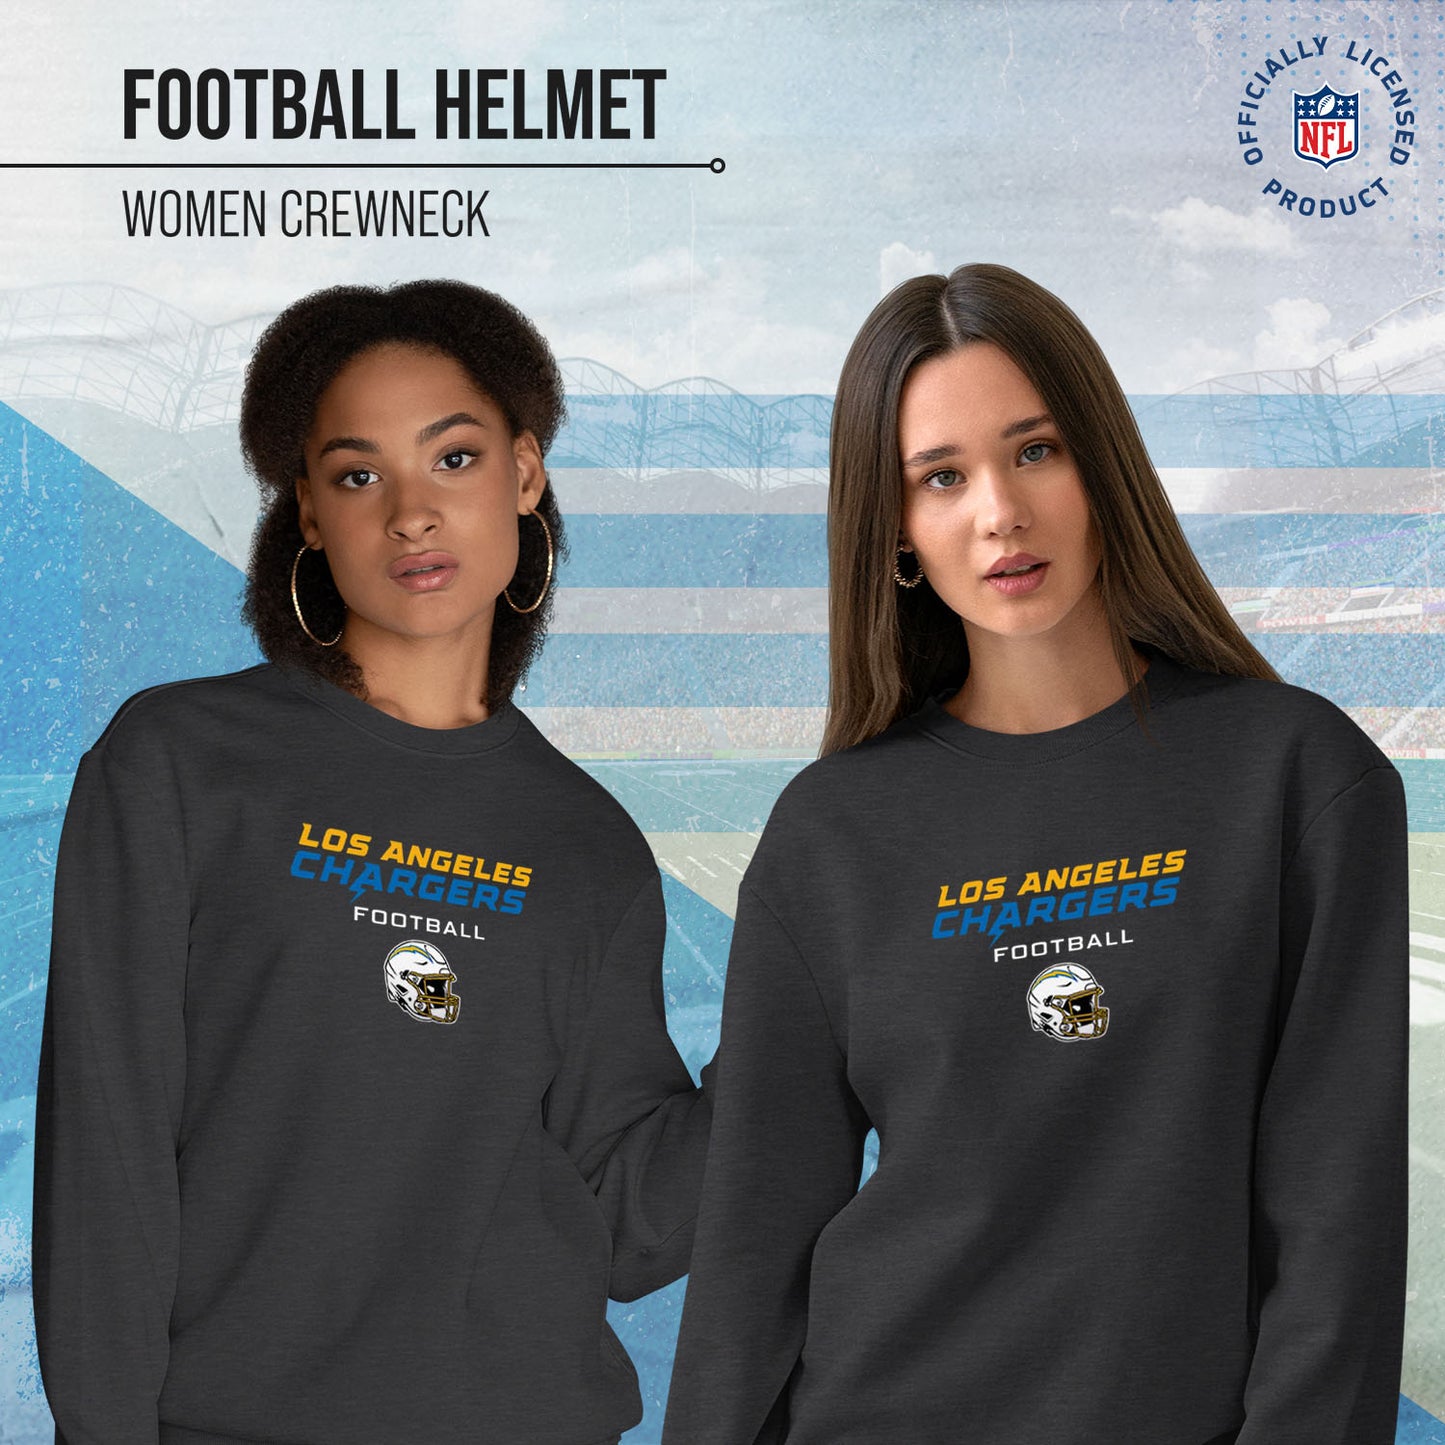 Los Angeles Chargers Women's NFL Football Helmet Charcoal Slouchy Crewneck -Tagless Lightweight Pullover - Charcoal